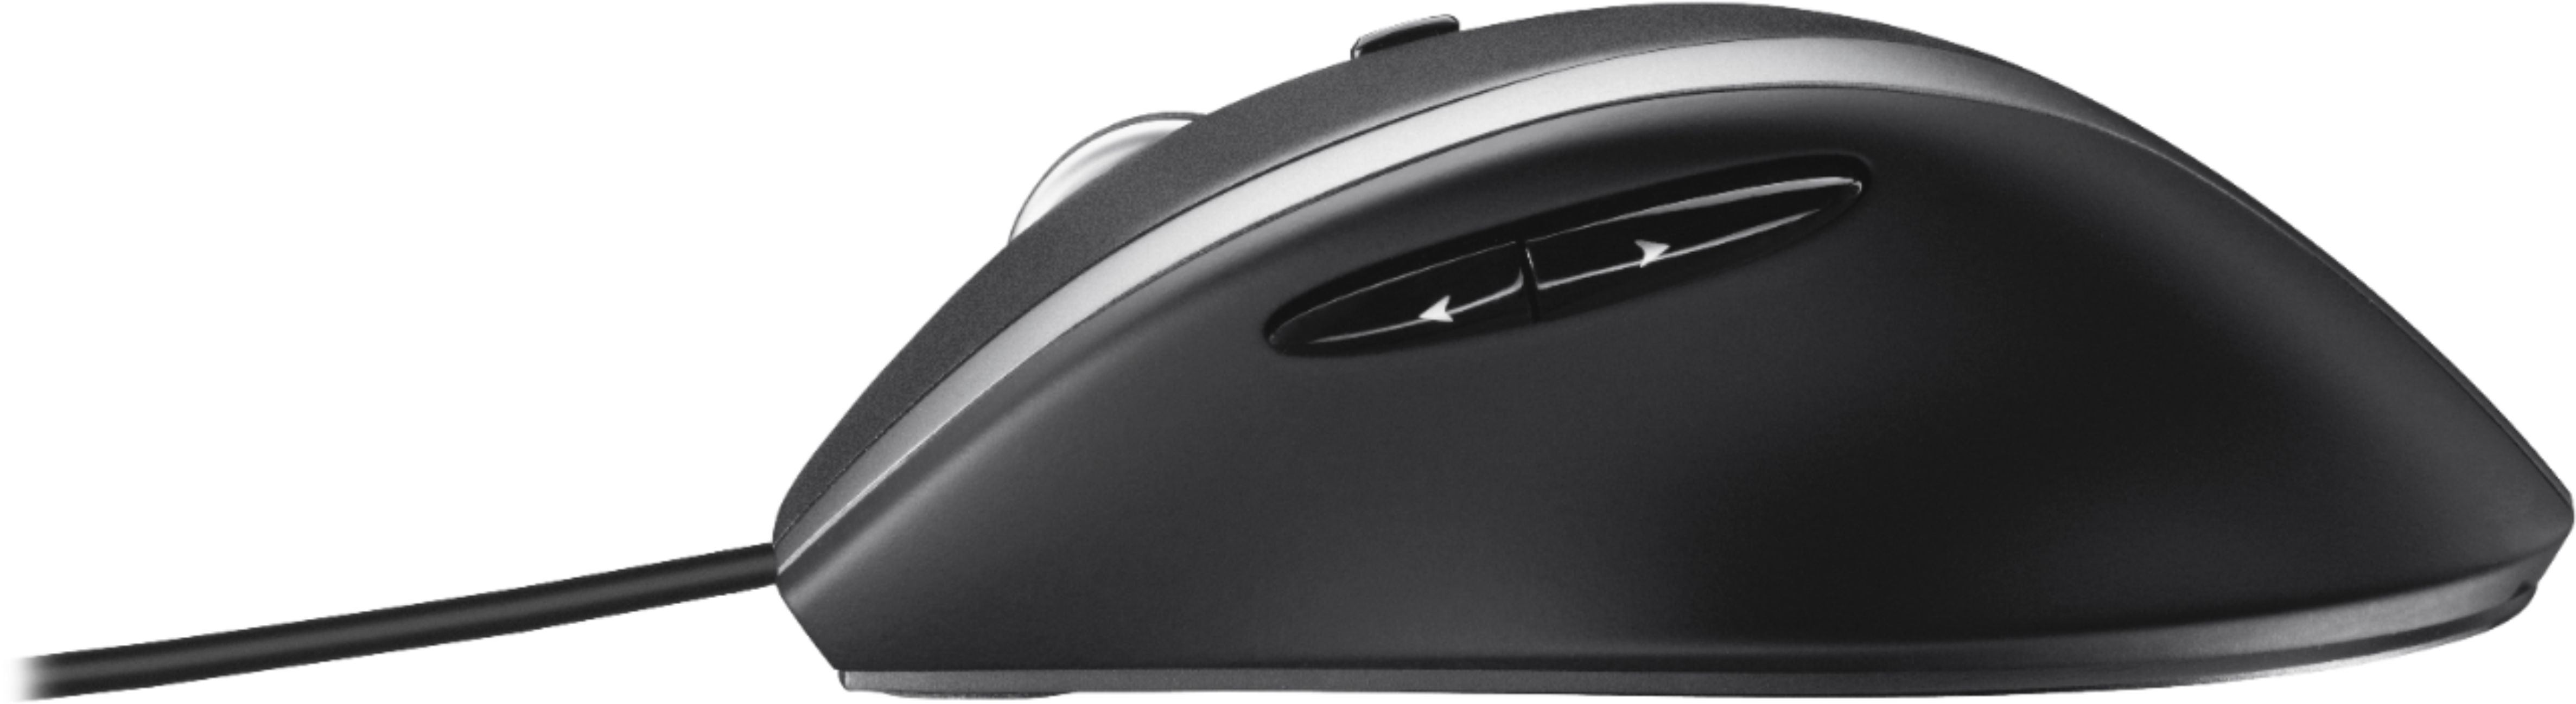 Logitech M500s Wired Laser Mouse with Hyper-fast Scrolling Black 910-005783 - Best Buy